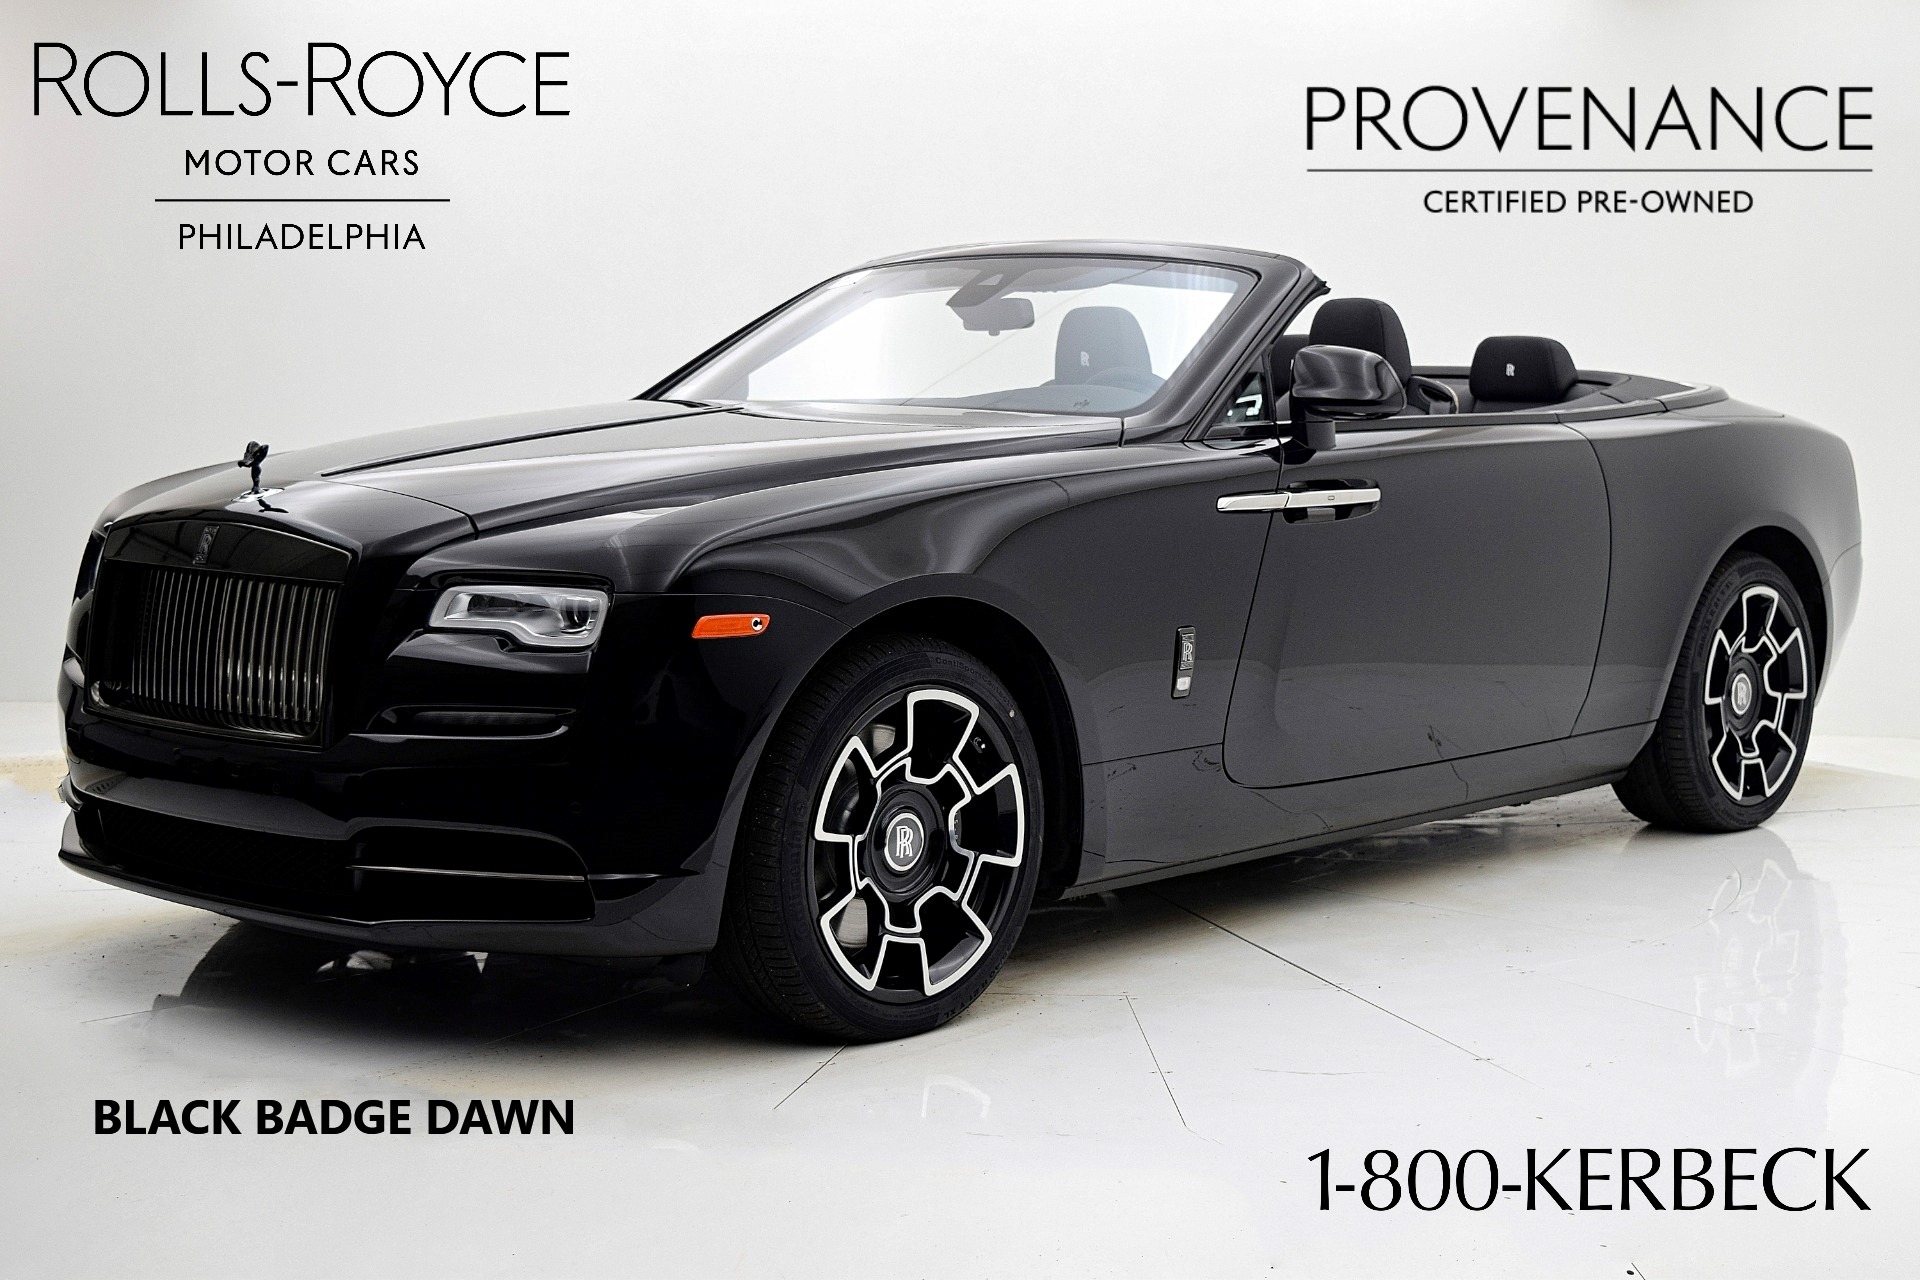 Used 2019 Rolls-Royce Black Badge Dawn / LEASE OPTIONS AVAILABLE for sale $379,000 at Bentley Palmyra N.J. in Palmyra NJ 08065 2